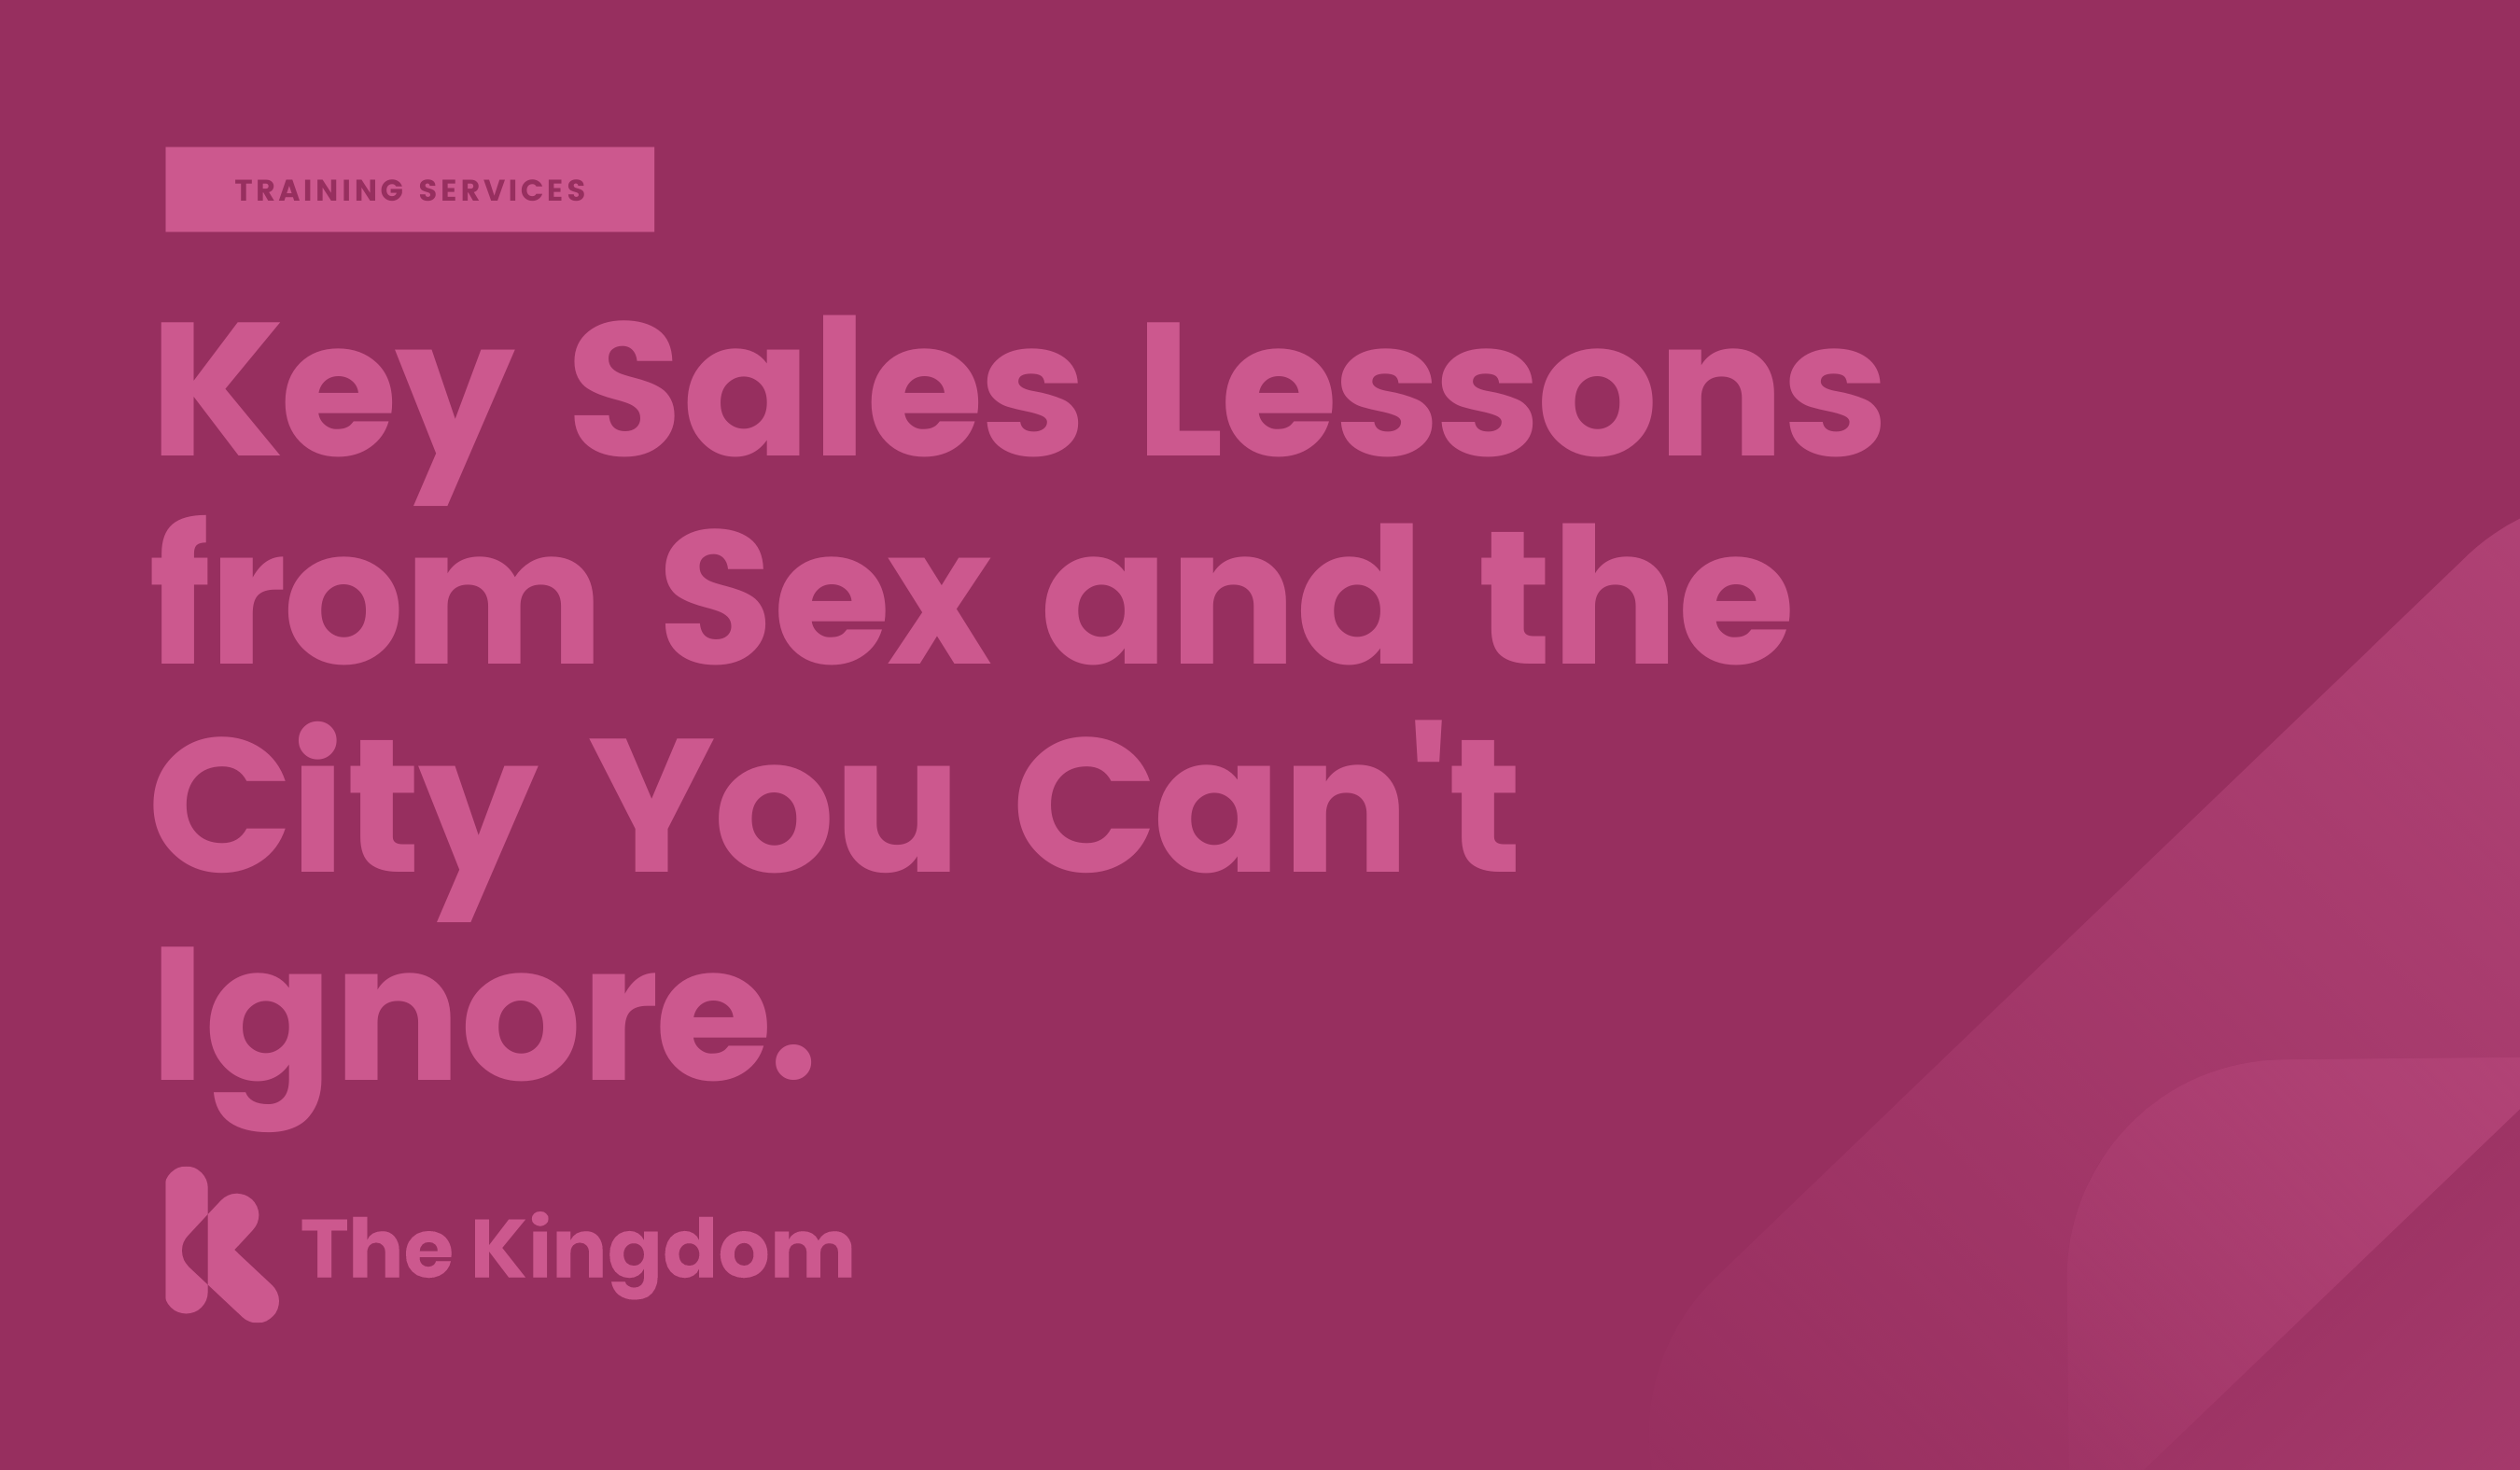 Key Sales Lessons from Sex and the City You Can't Ignore.